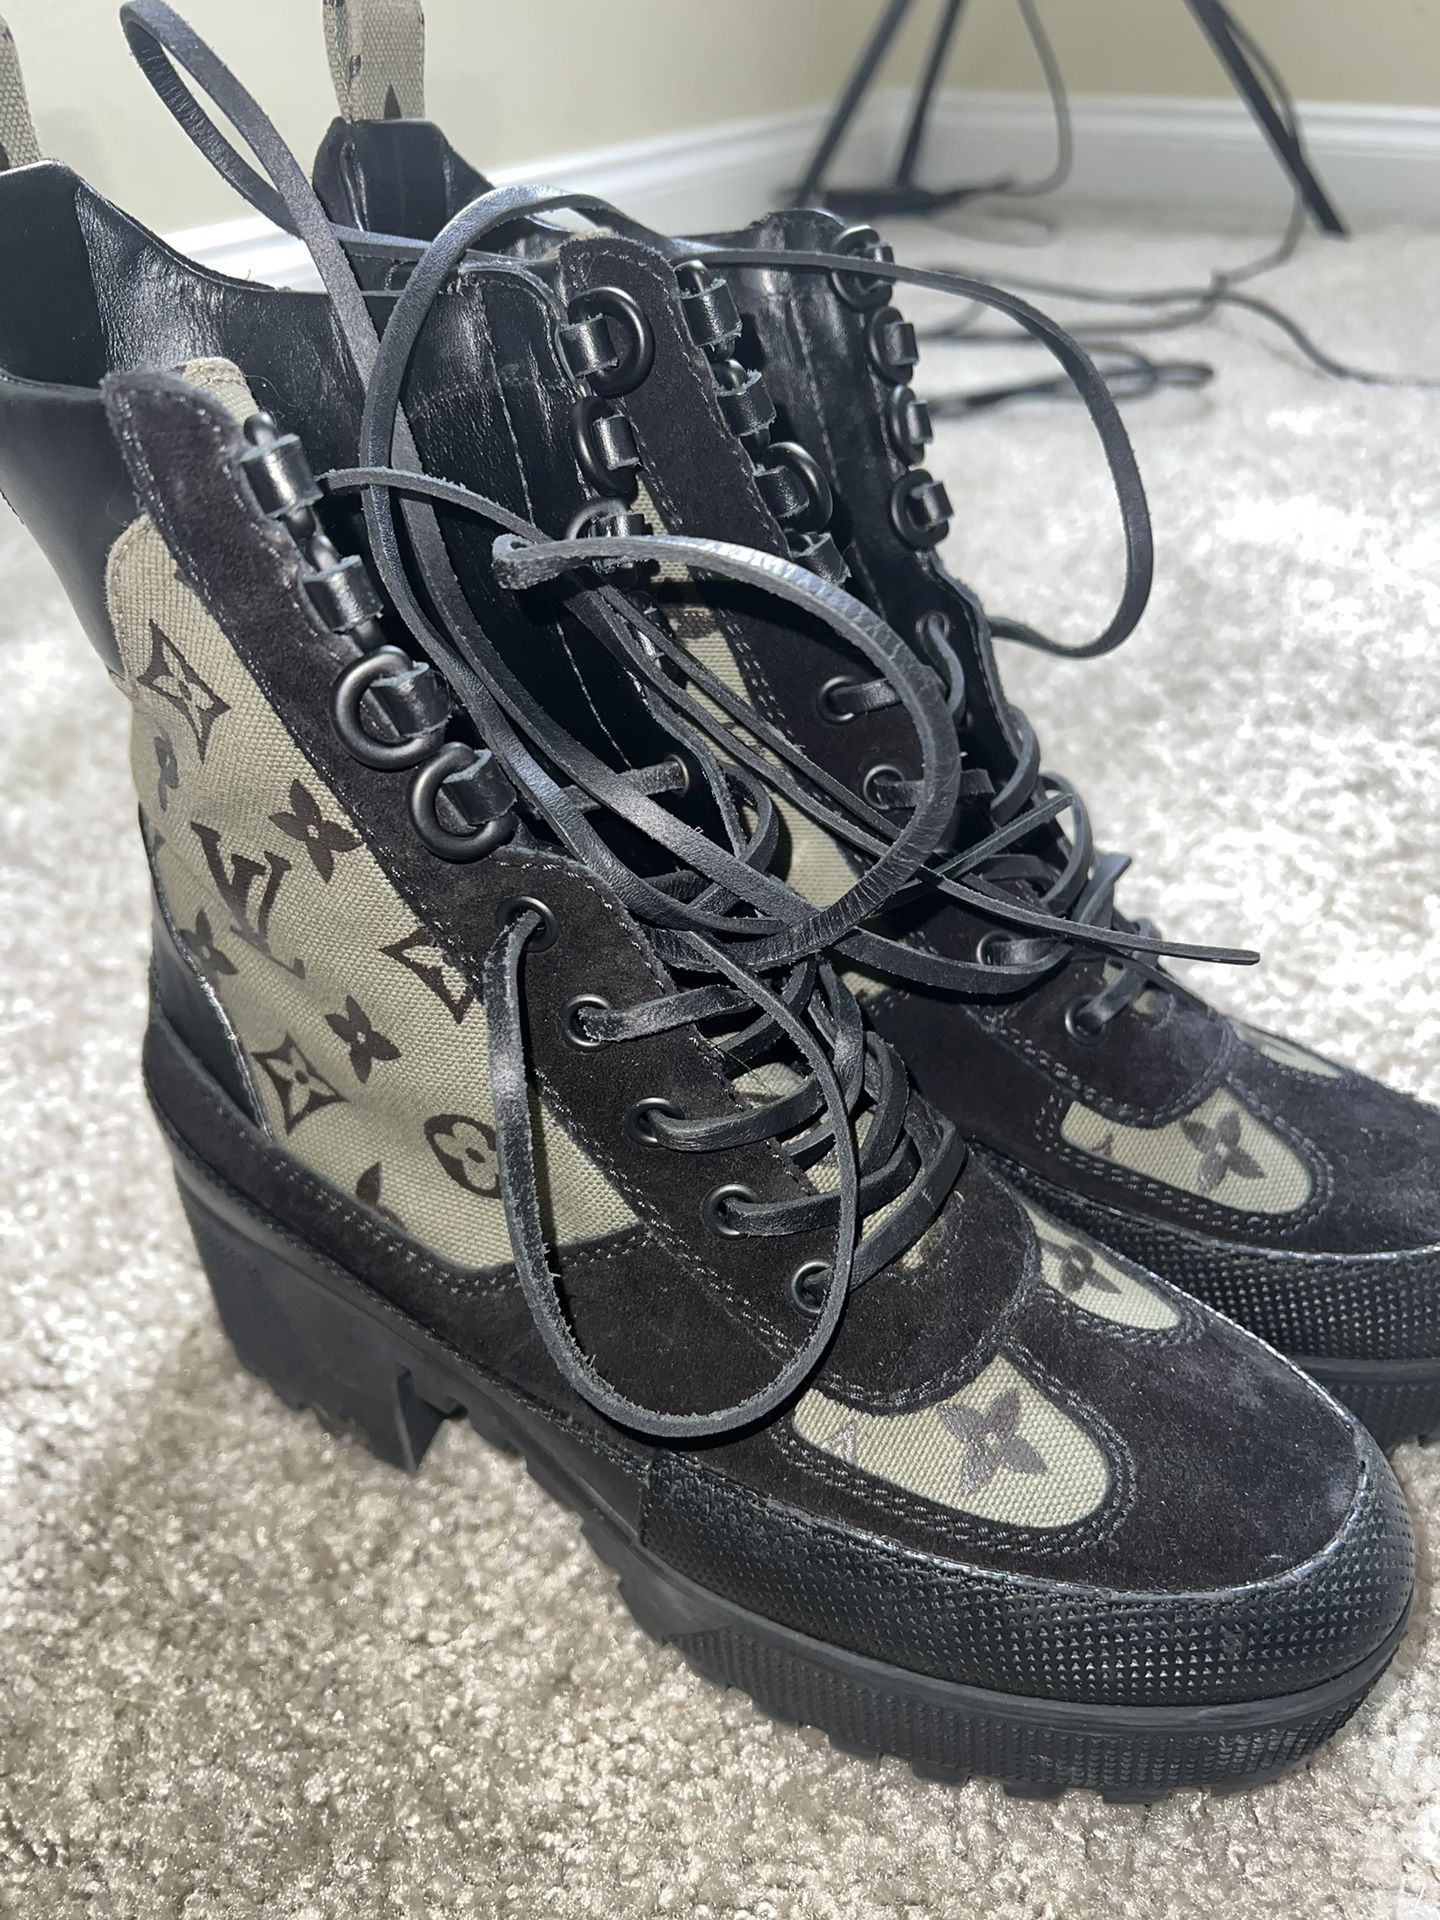 Cater Calamity brud Louis Vuitton Boots for Sale in Los Angeles, CA - OfferUp